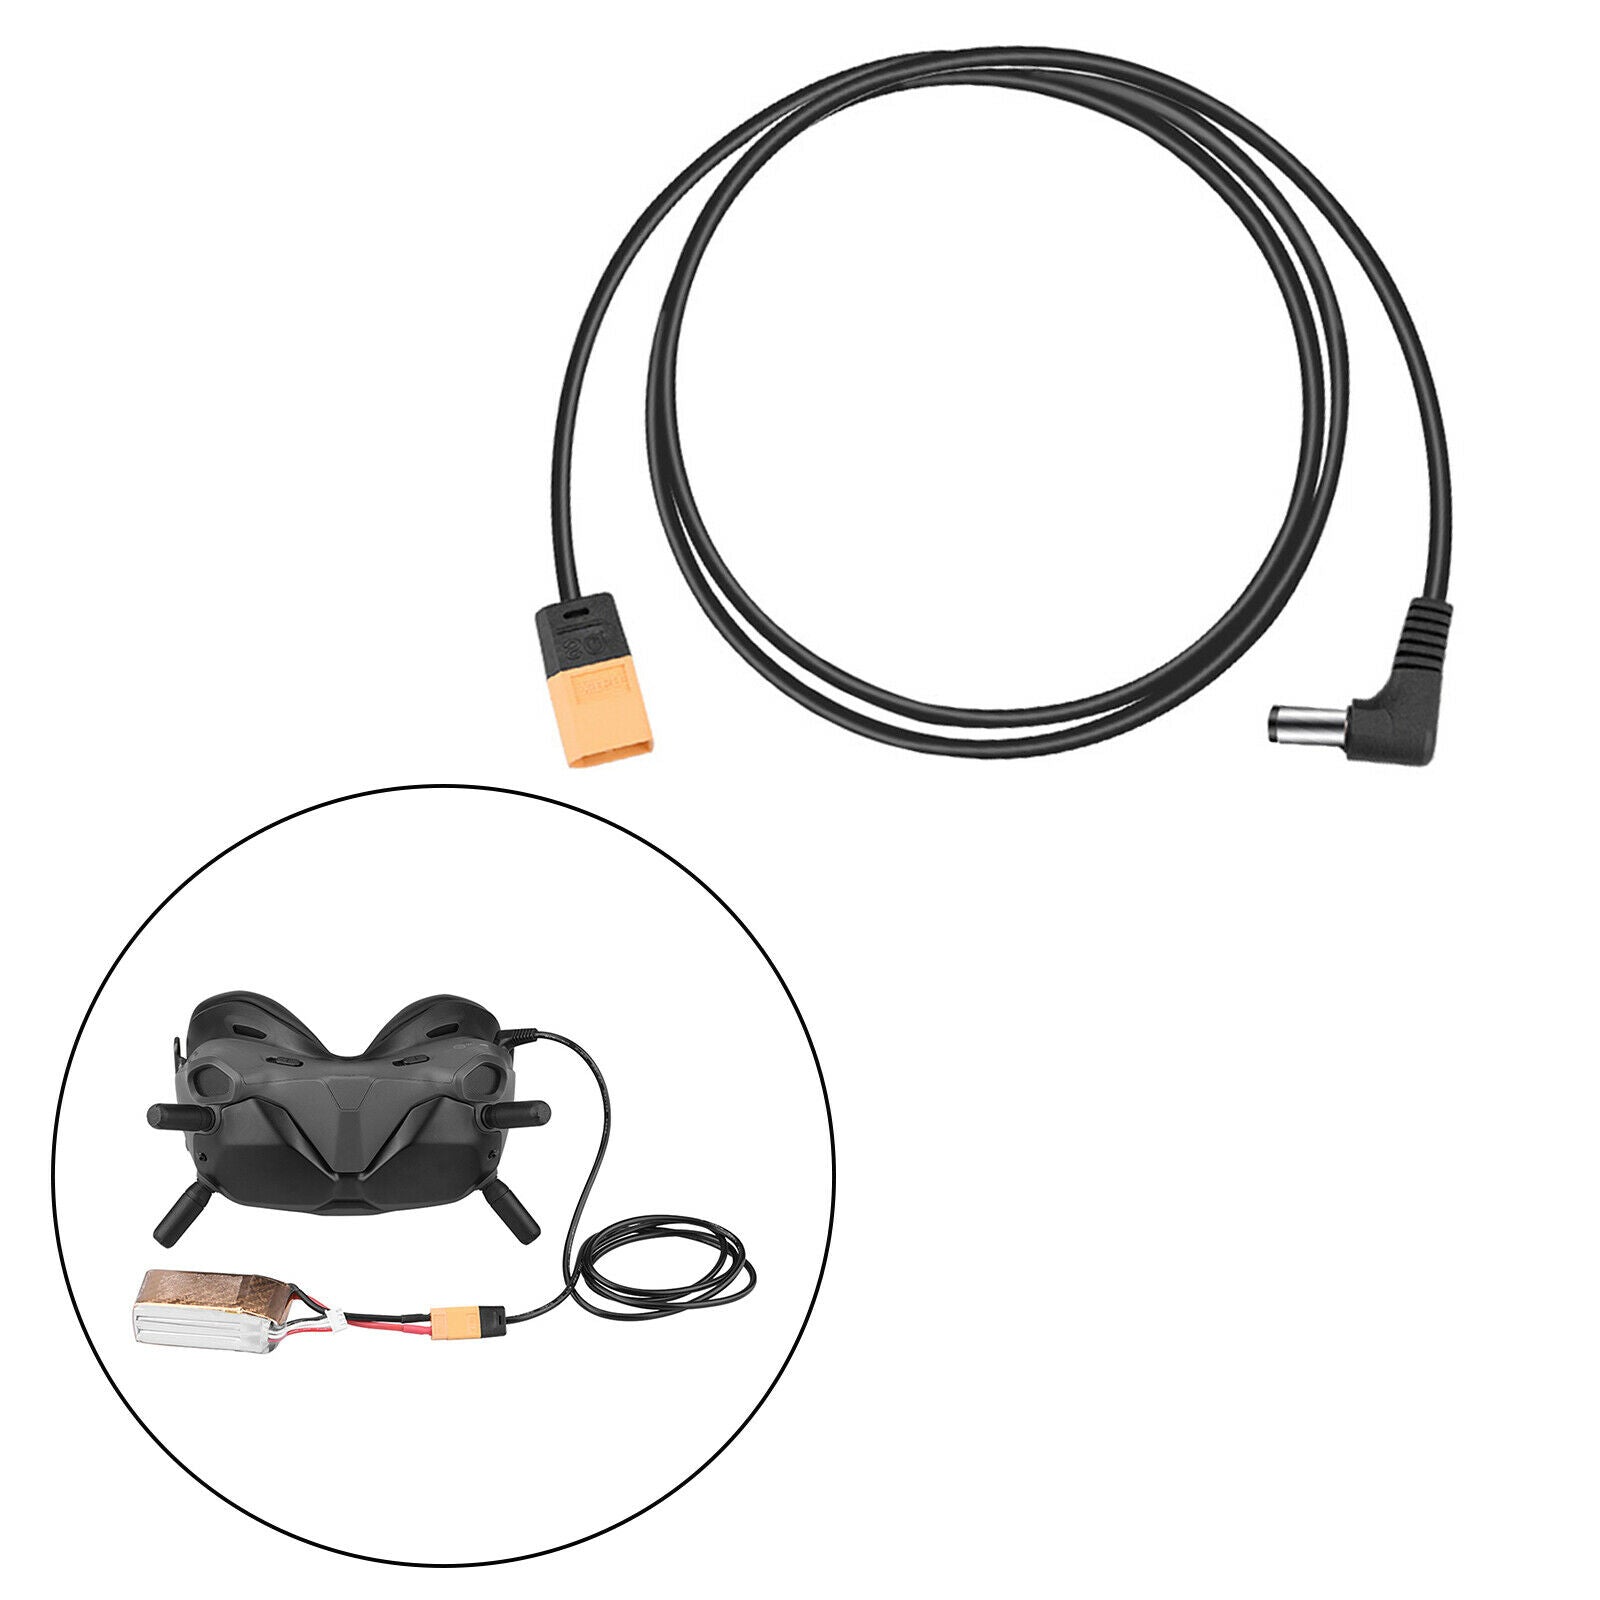 XT60 Male to Male DC 5.5x2.5mm Power Cable Adaptor for TS100 Plug and Play